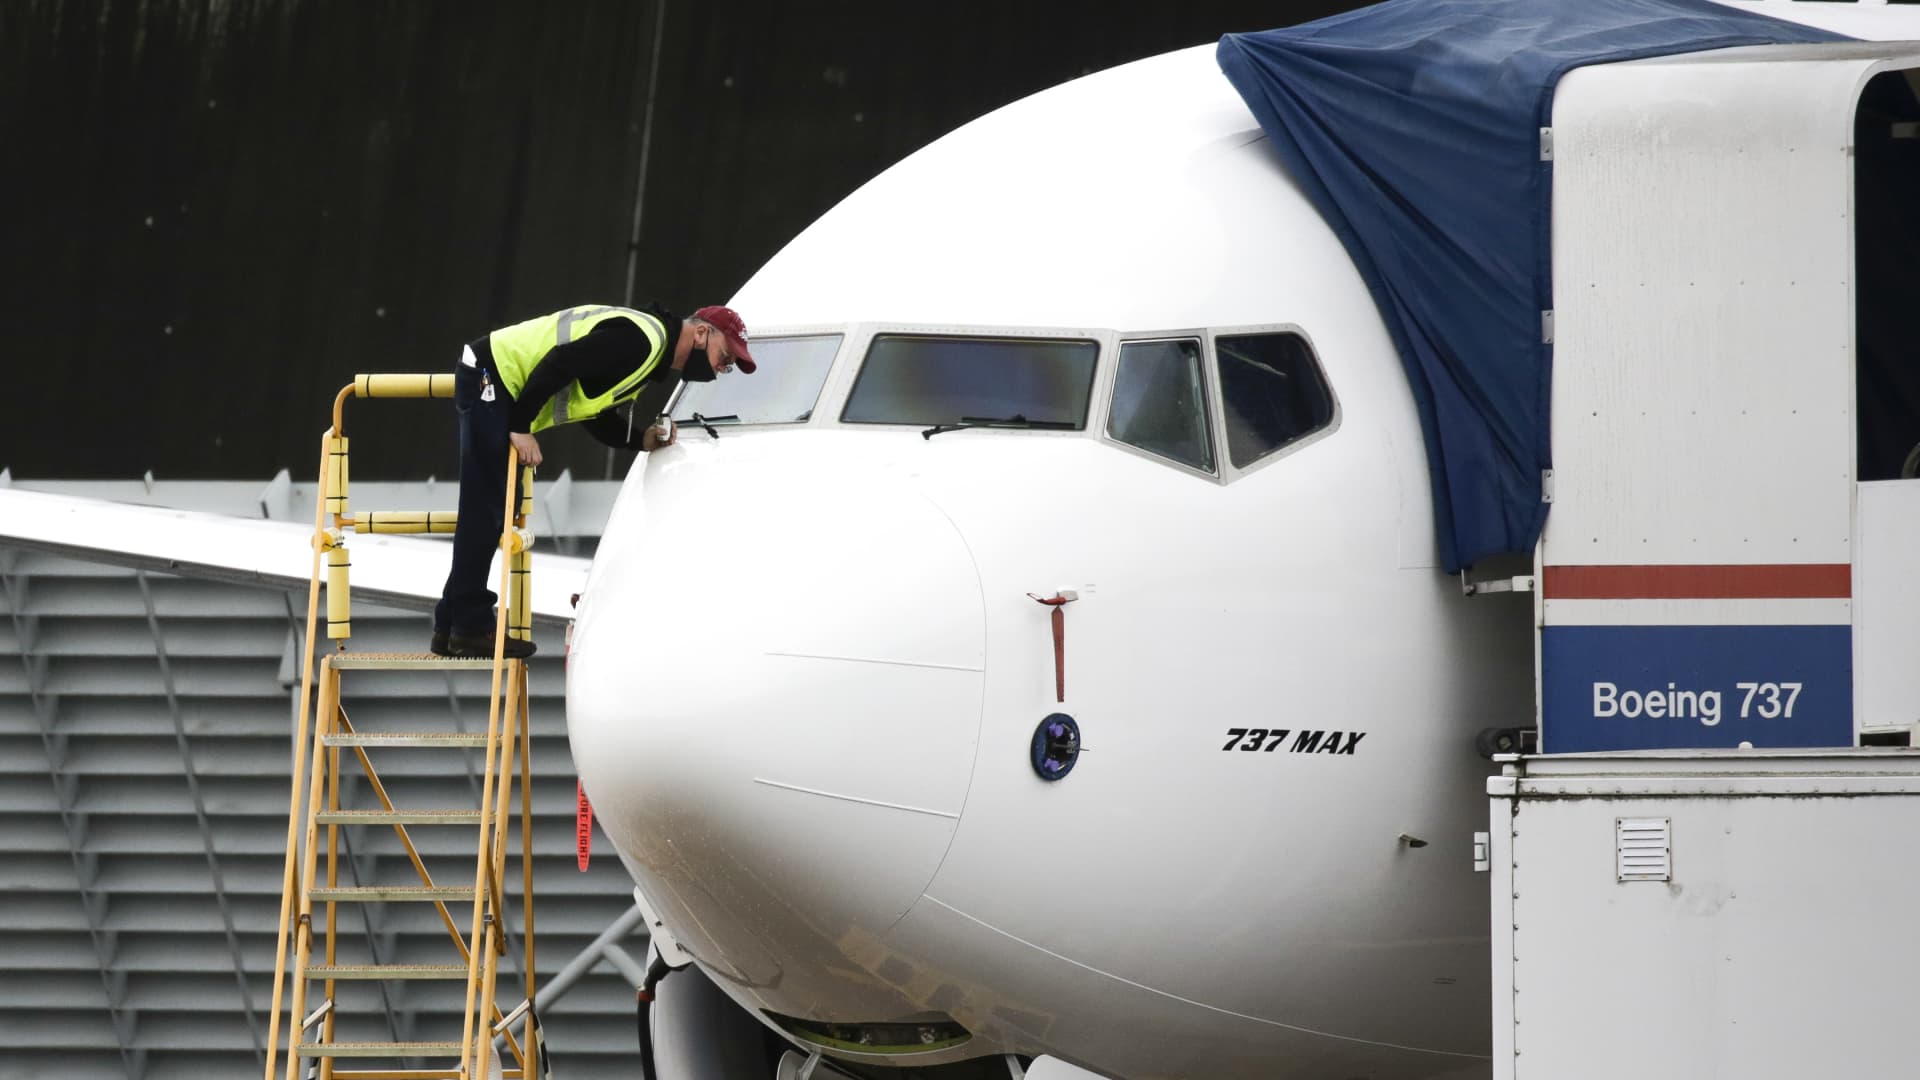 A worker inspects a Boeing 737 MAX airliner at Renton Airport adjacent to the Boeing Renton Factory in Renton, Washington on November 10, 2020.